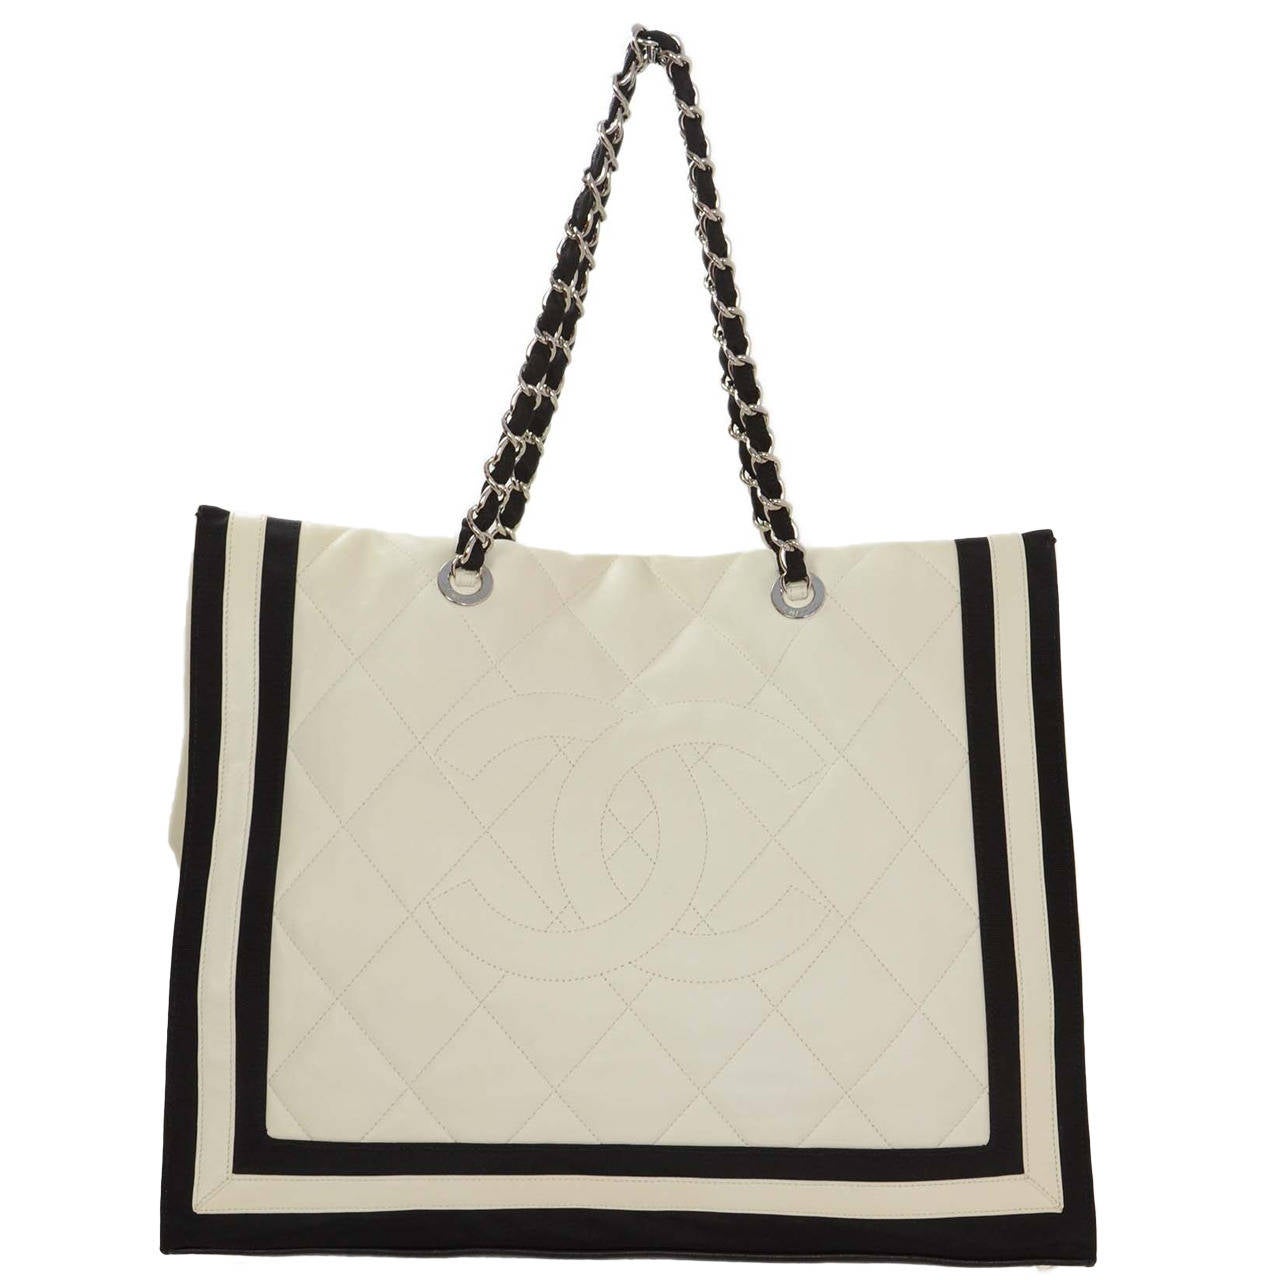 CHANEL White Lambskin Quilted XL Tote W/ Black Grosgrain Trim at 1stdibs